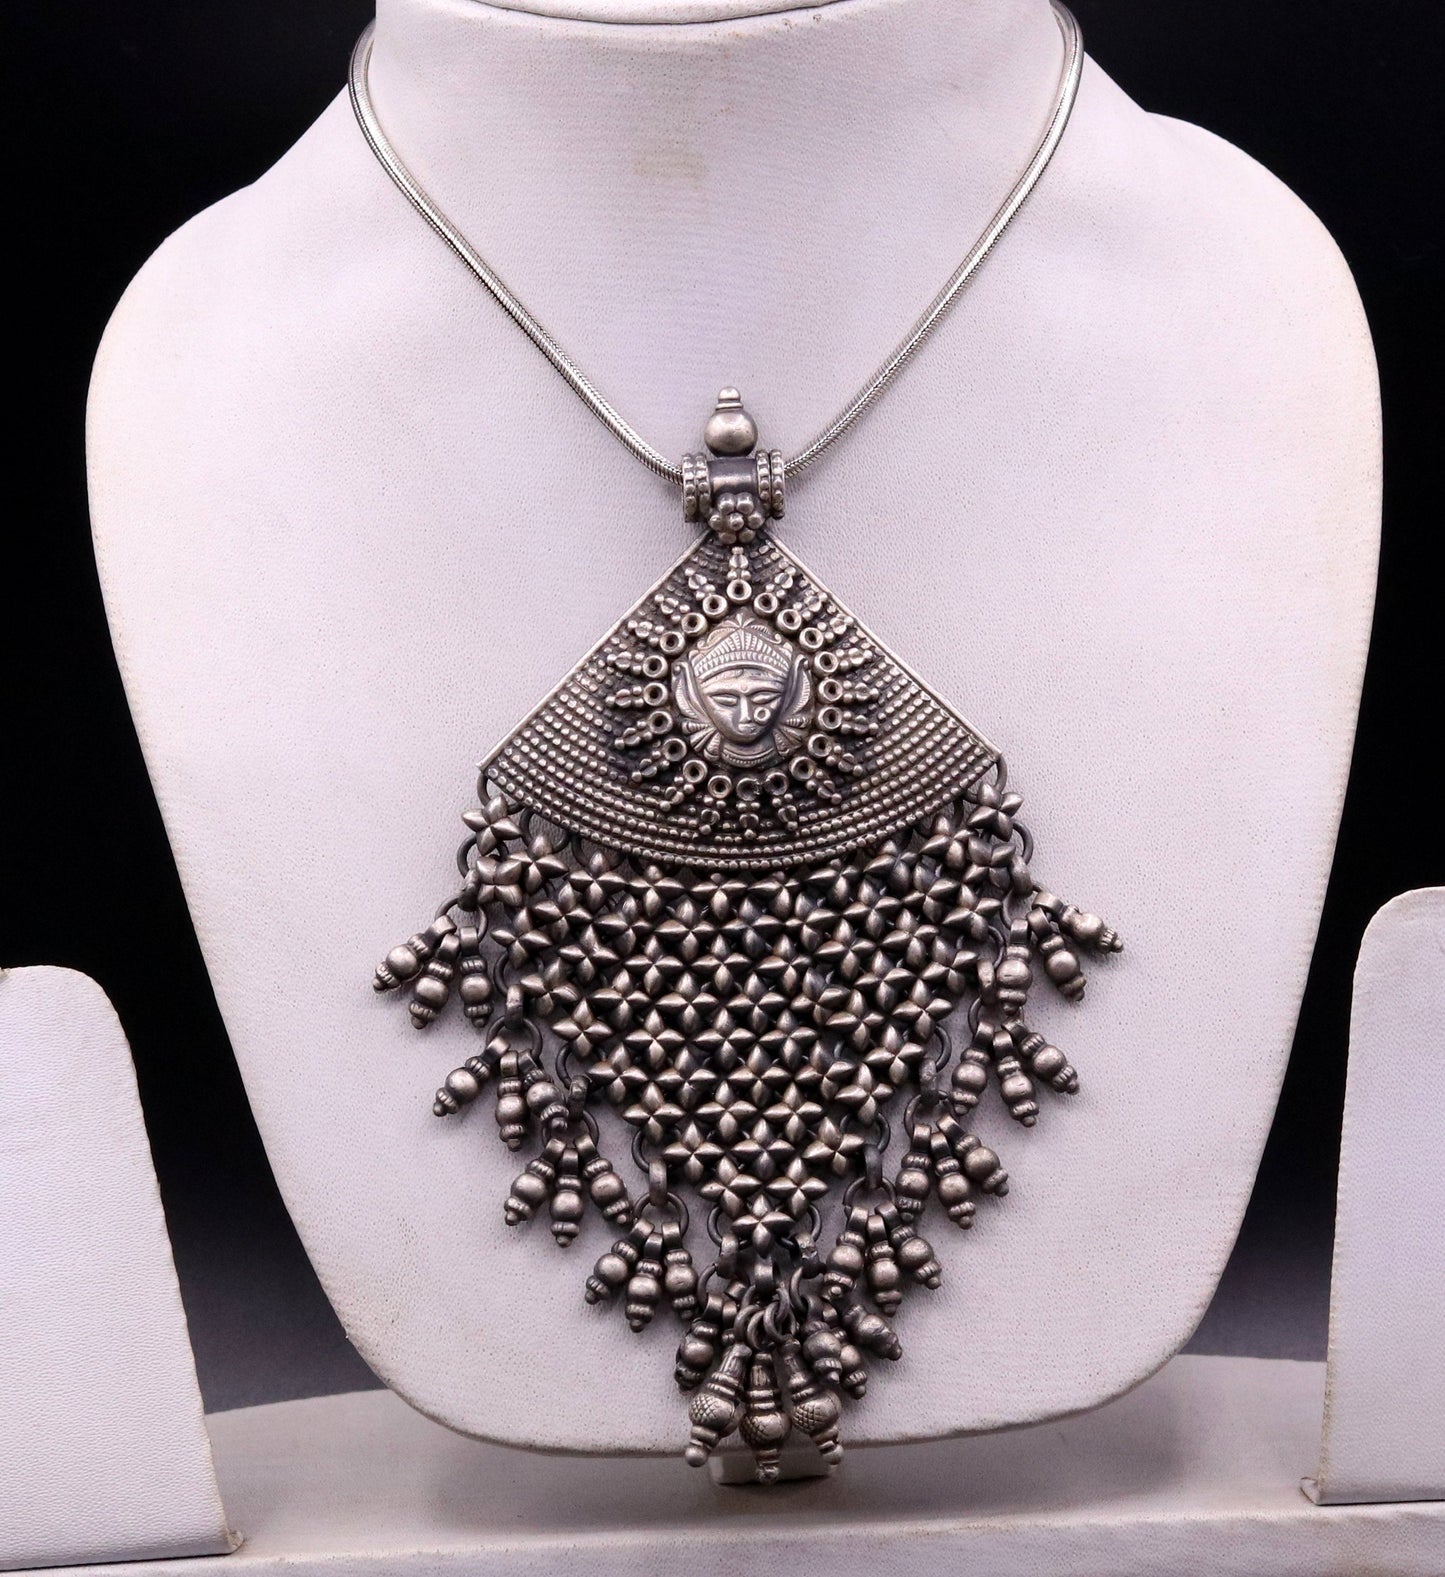 925 sterling silver Goddess Bhawani pendant, oxidized custom made gifting pendant necklace tribal ethnic temple charm jewelry nsp334 - TRIBAL ORNAMENTS